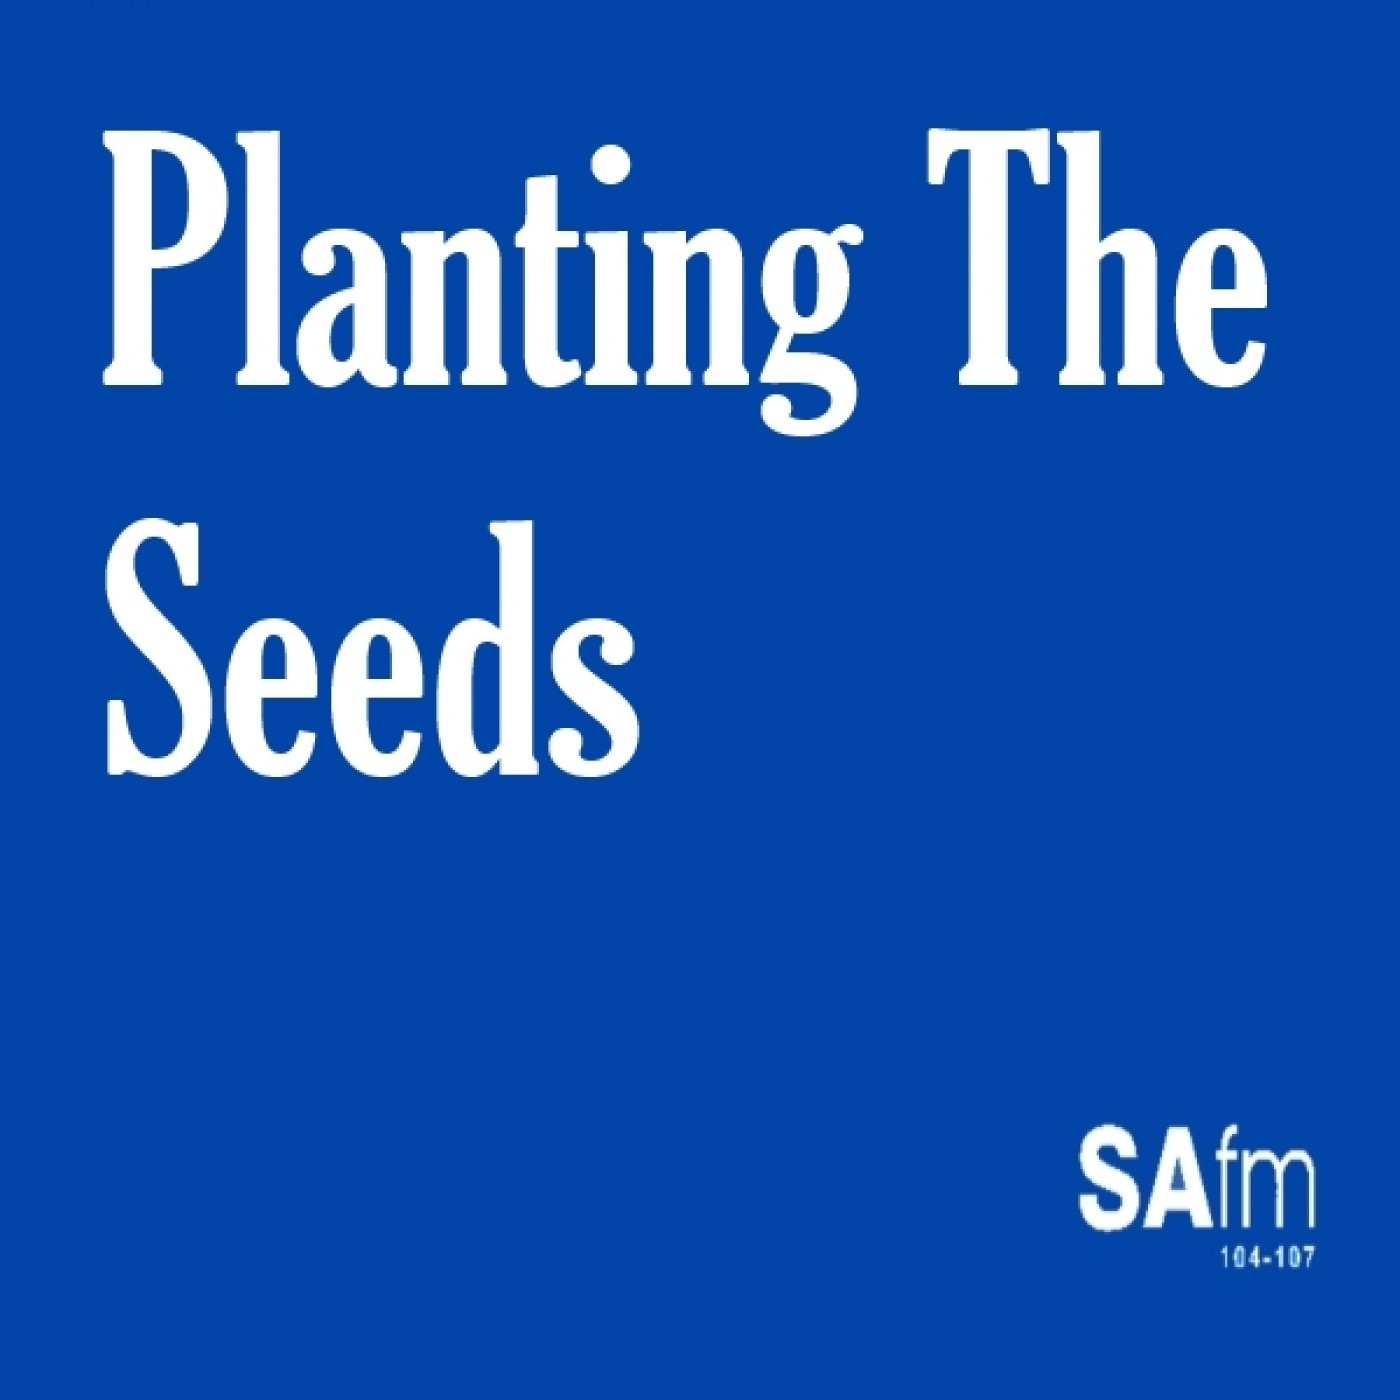 20-03-2019 PLANTING THE SEEDS